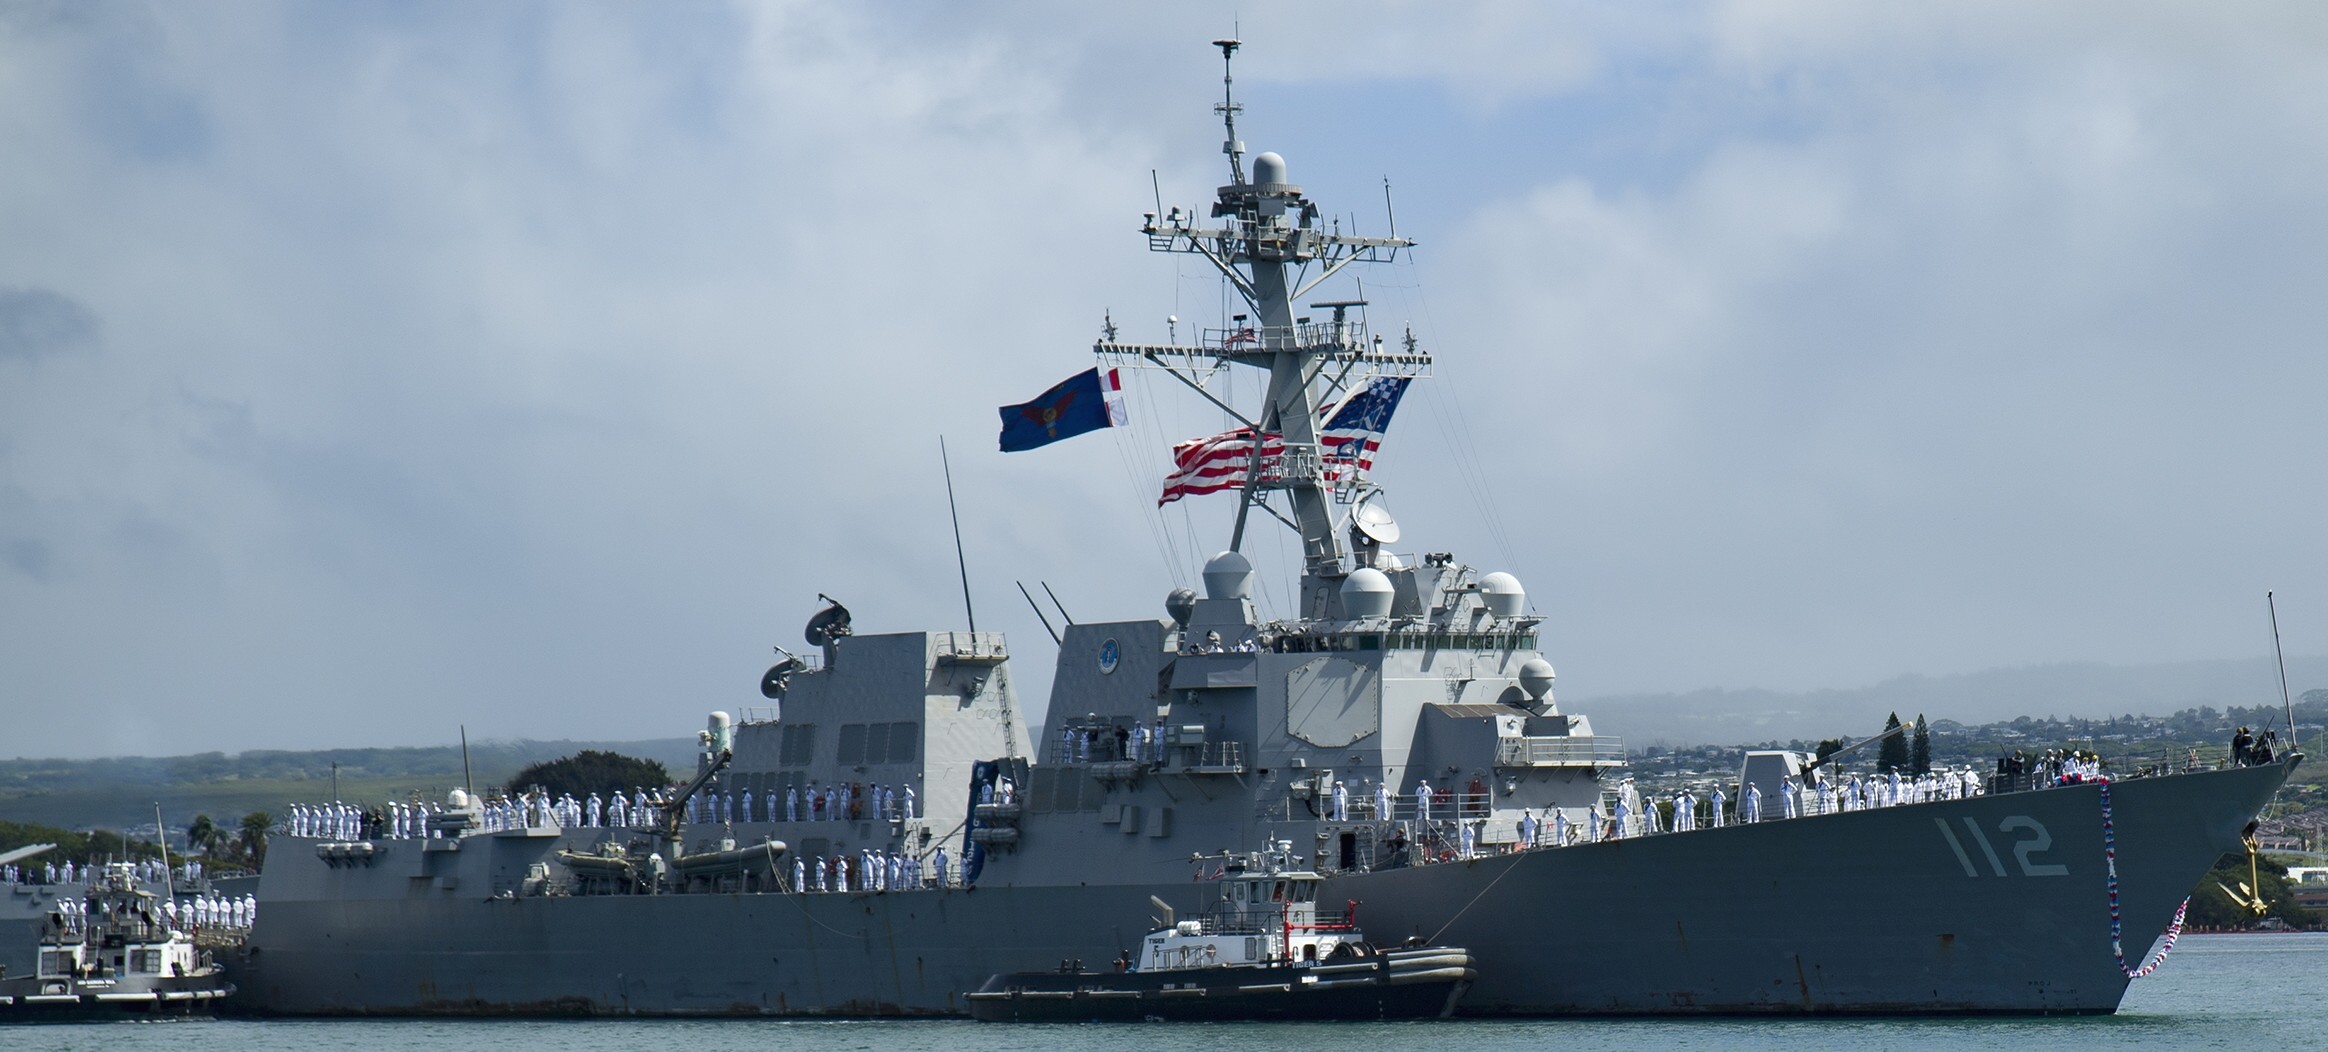 ddg-112 uss michael murphy arleigh burke class guided missile destroyer aegis us navy 35